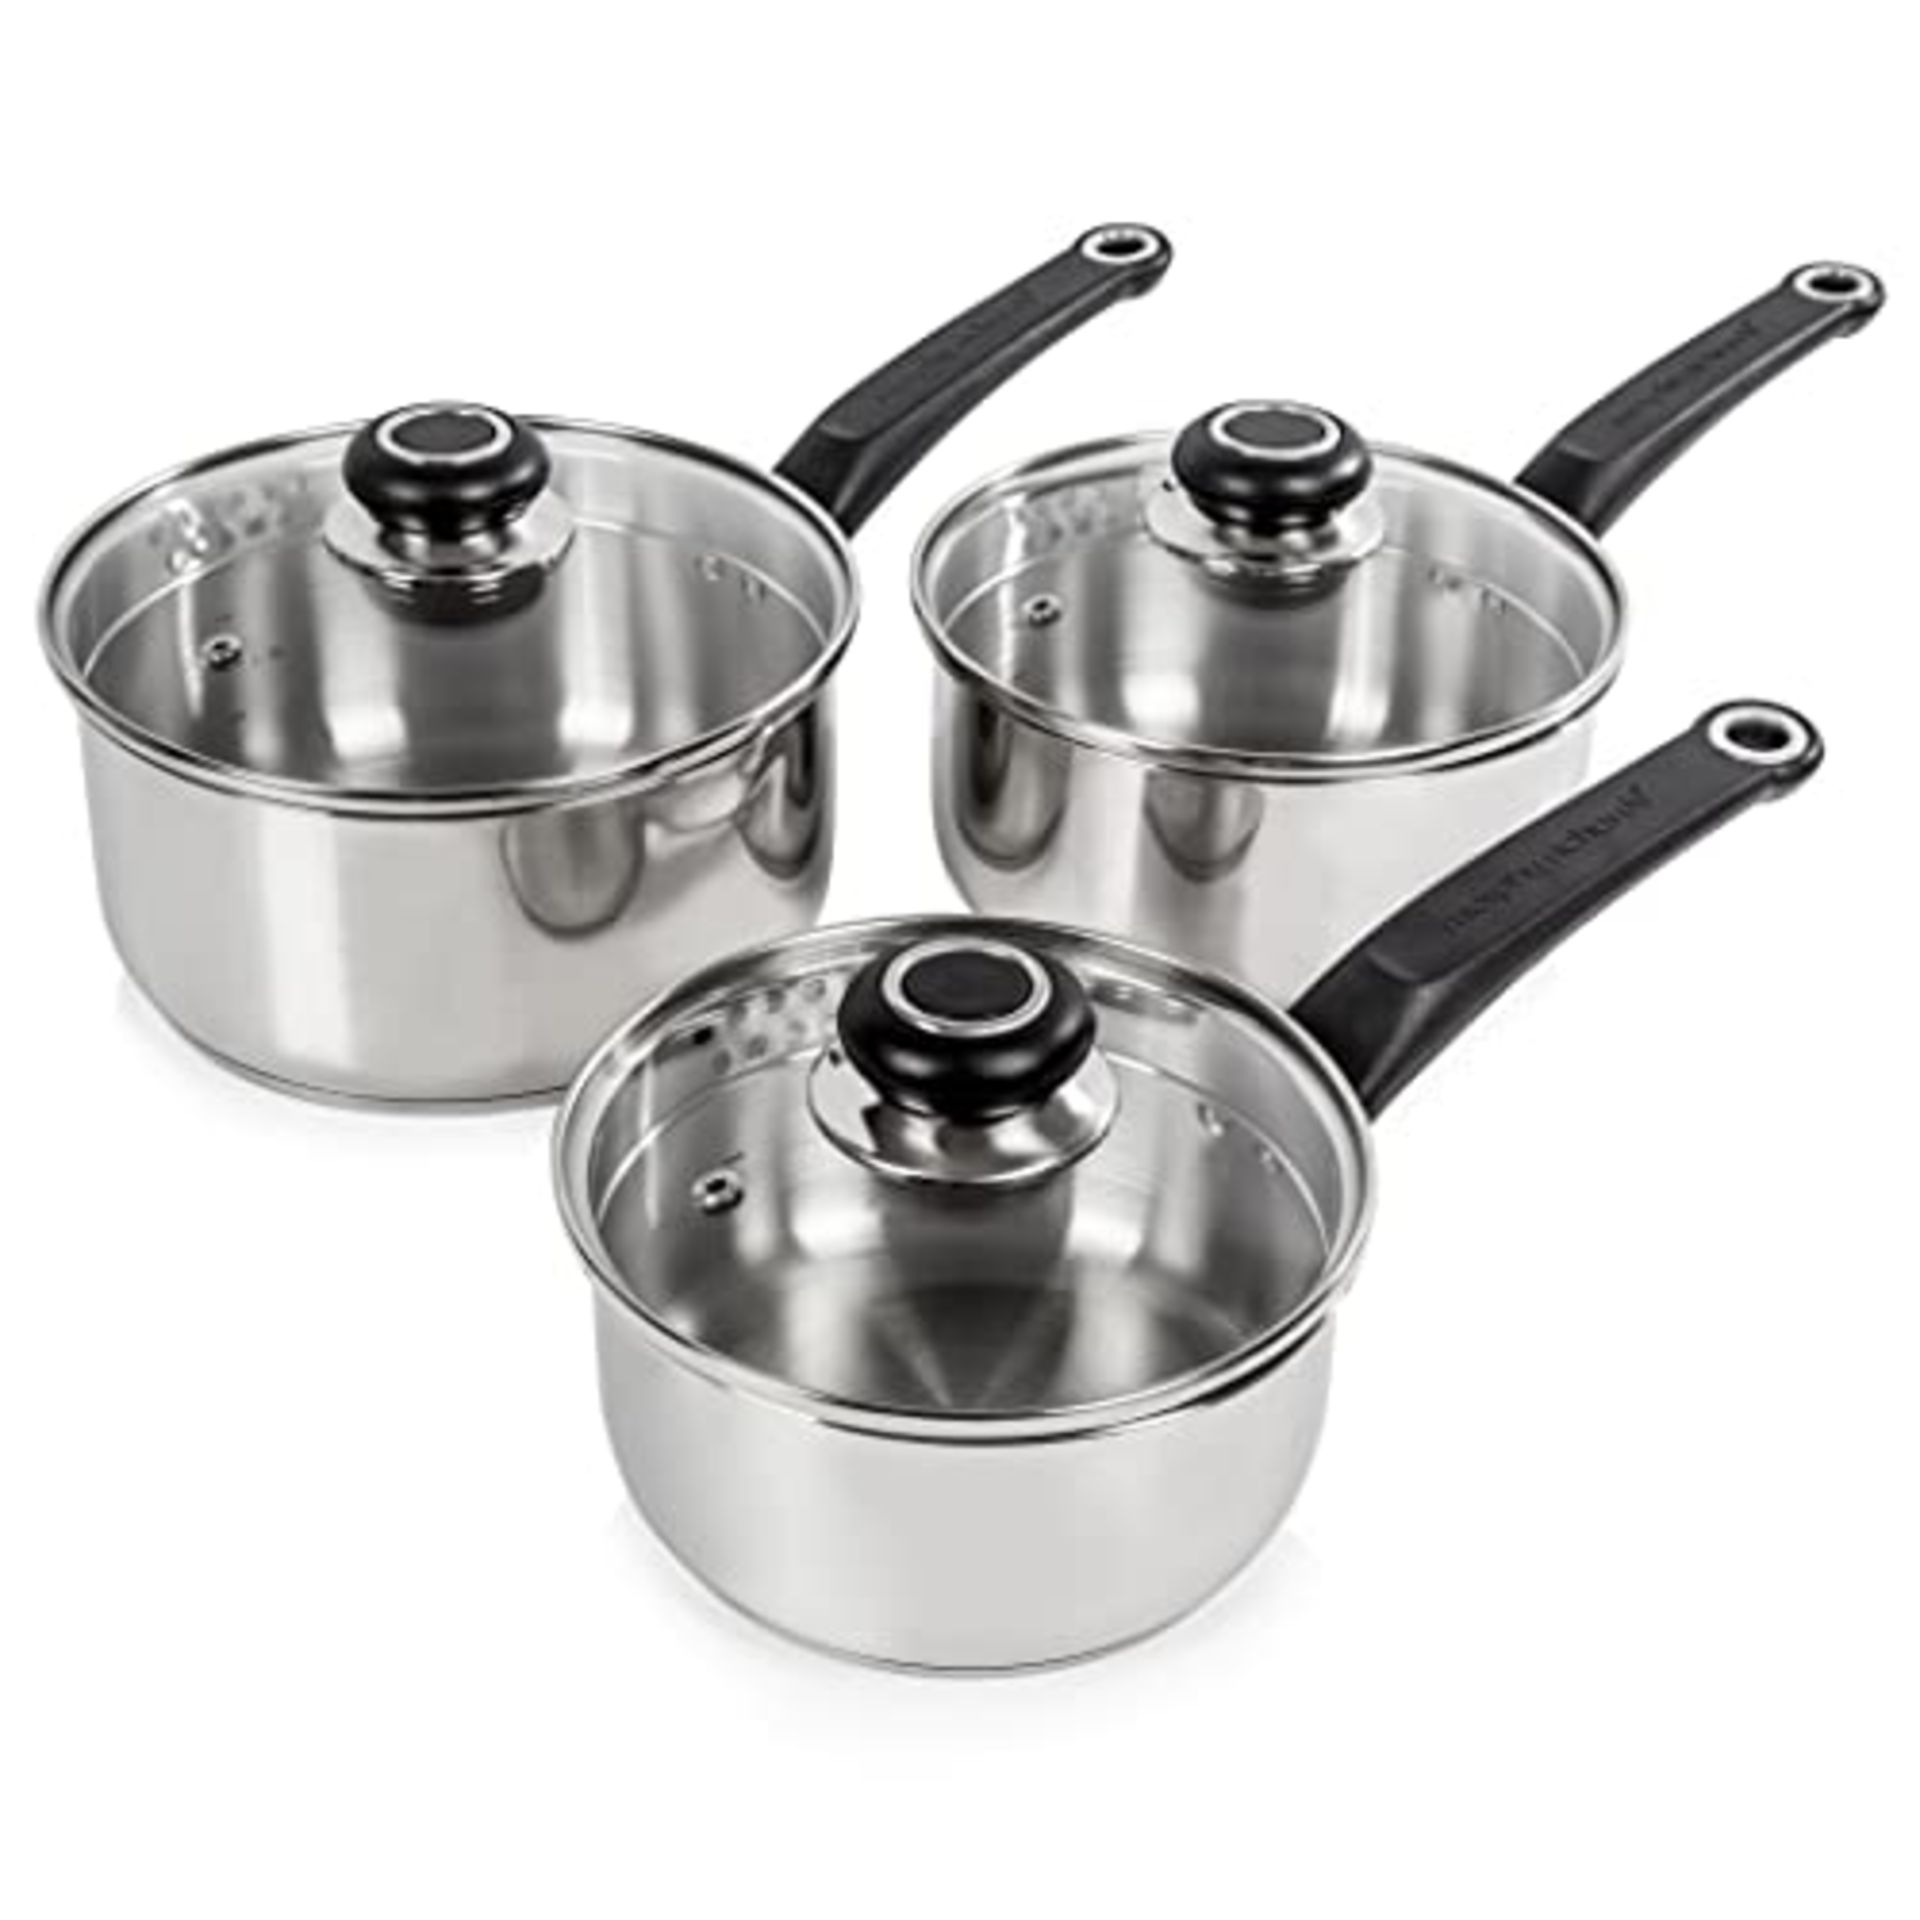 Morphy Richards Equip 3 Piece Pan Set-Stainless Steel, Set of 3